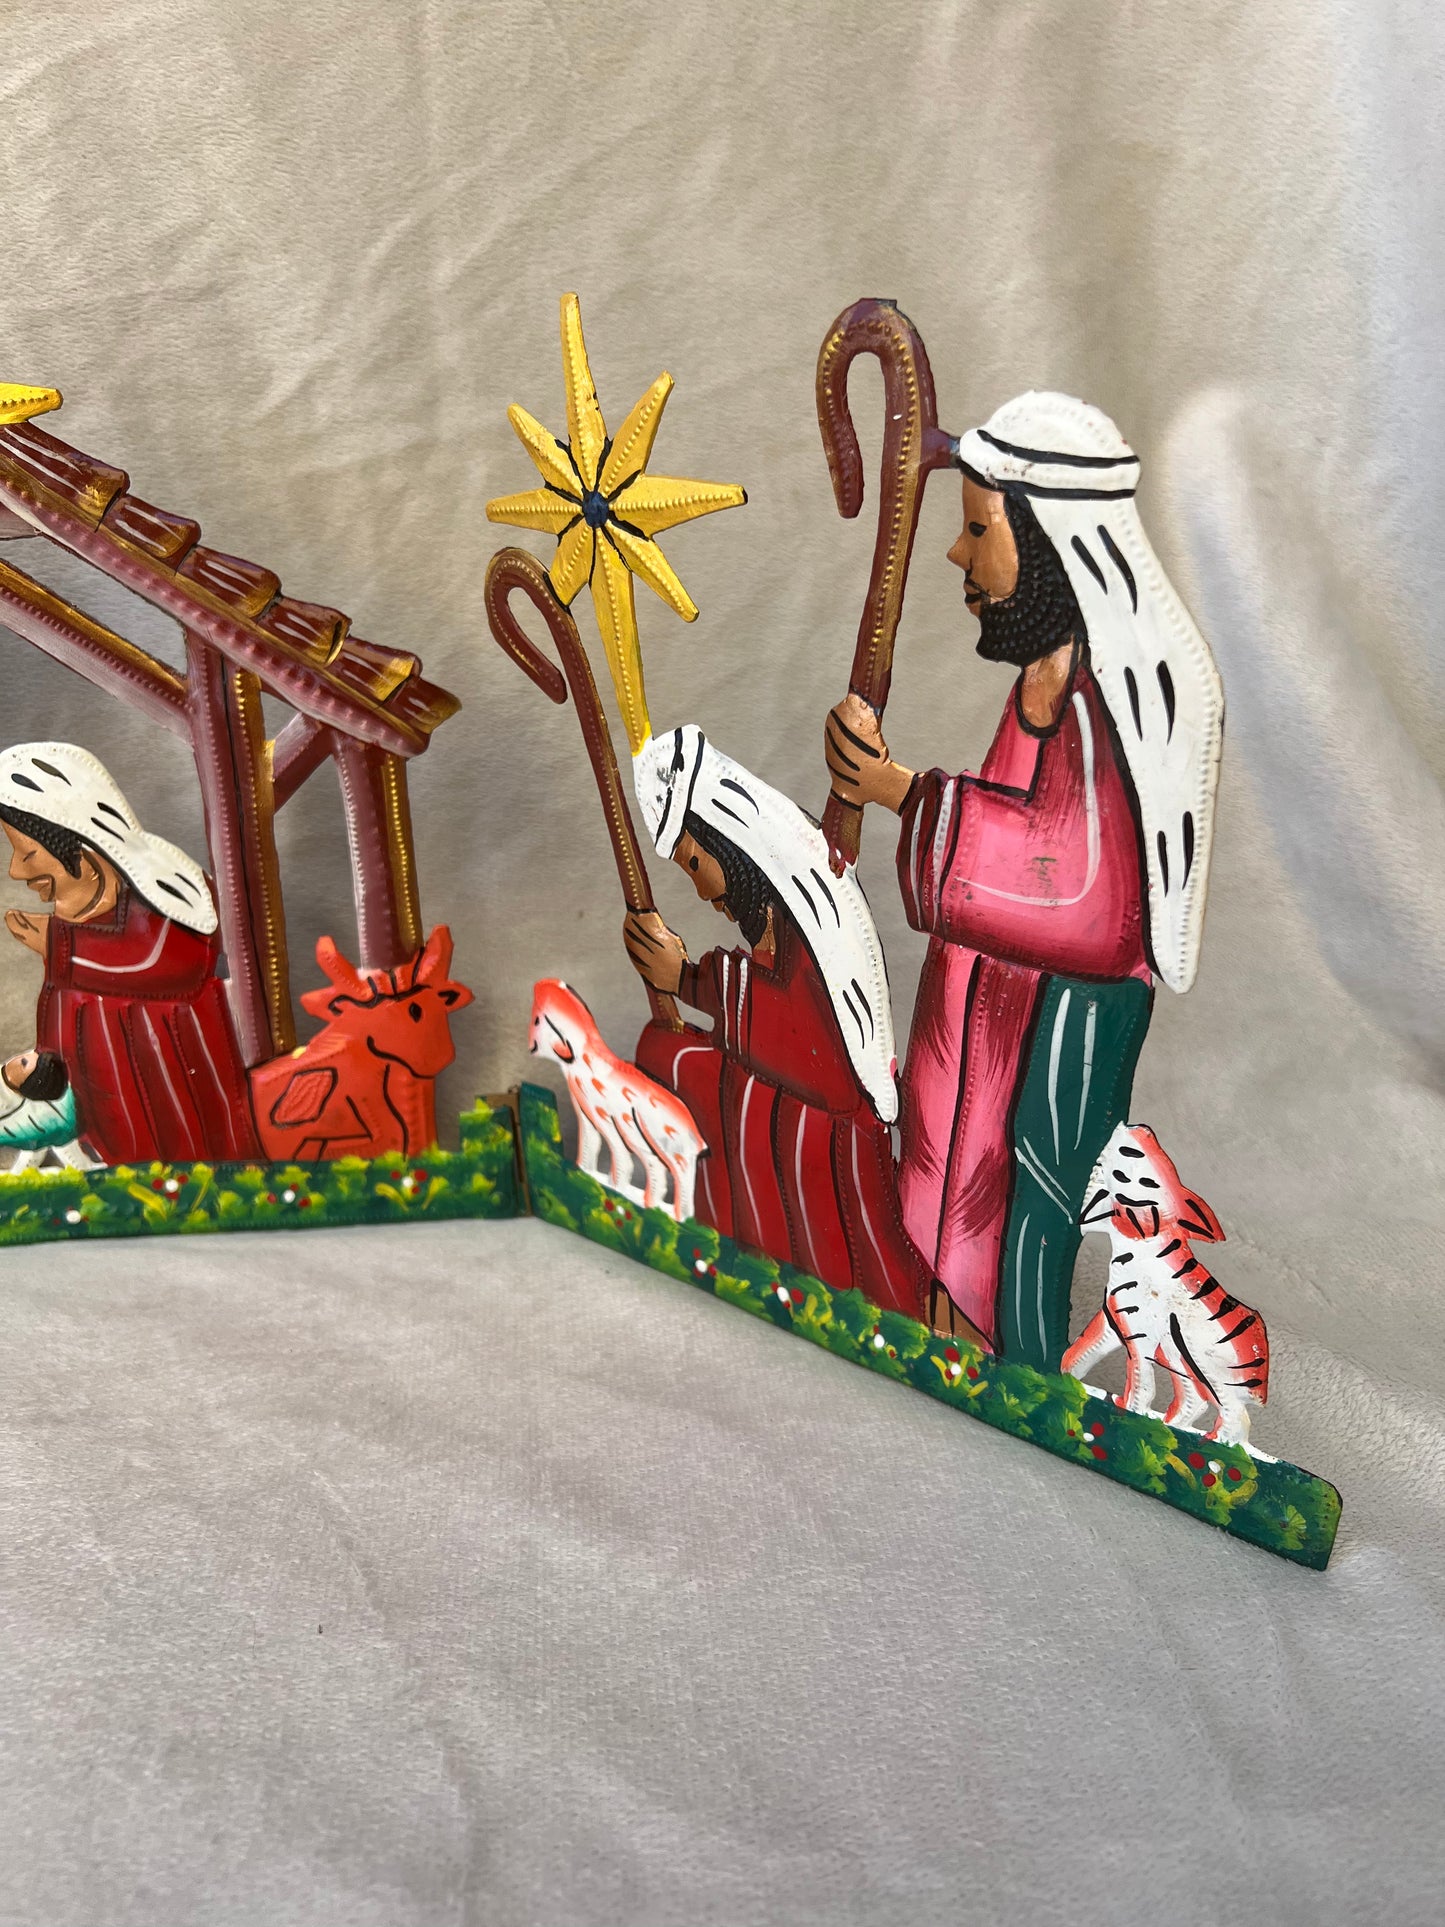 Trifold Painted Nativity